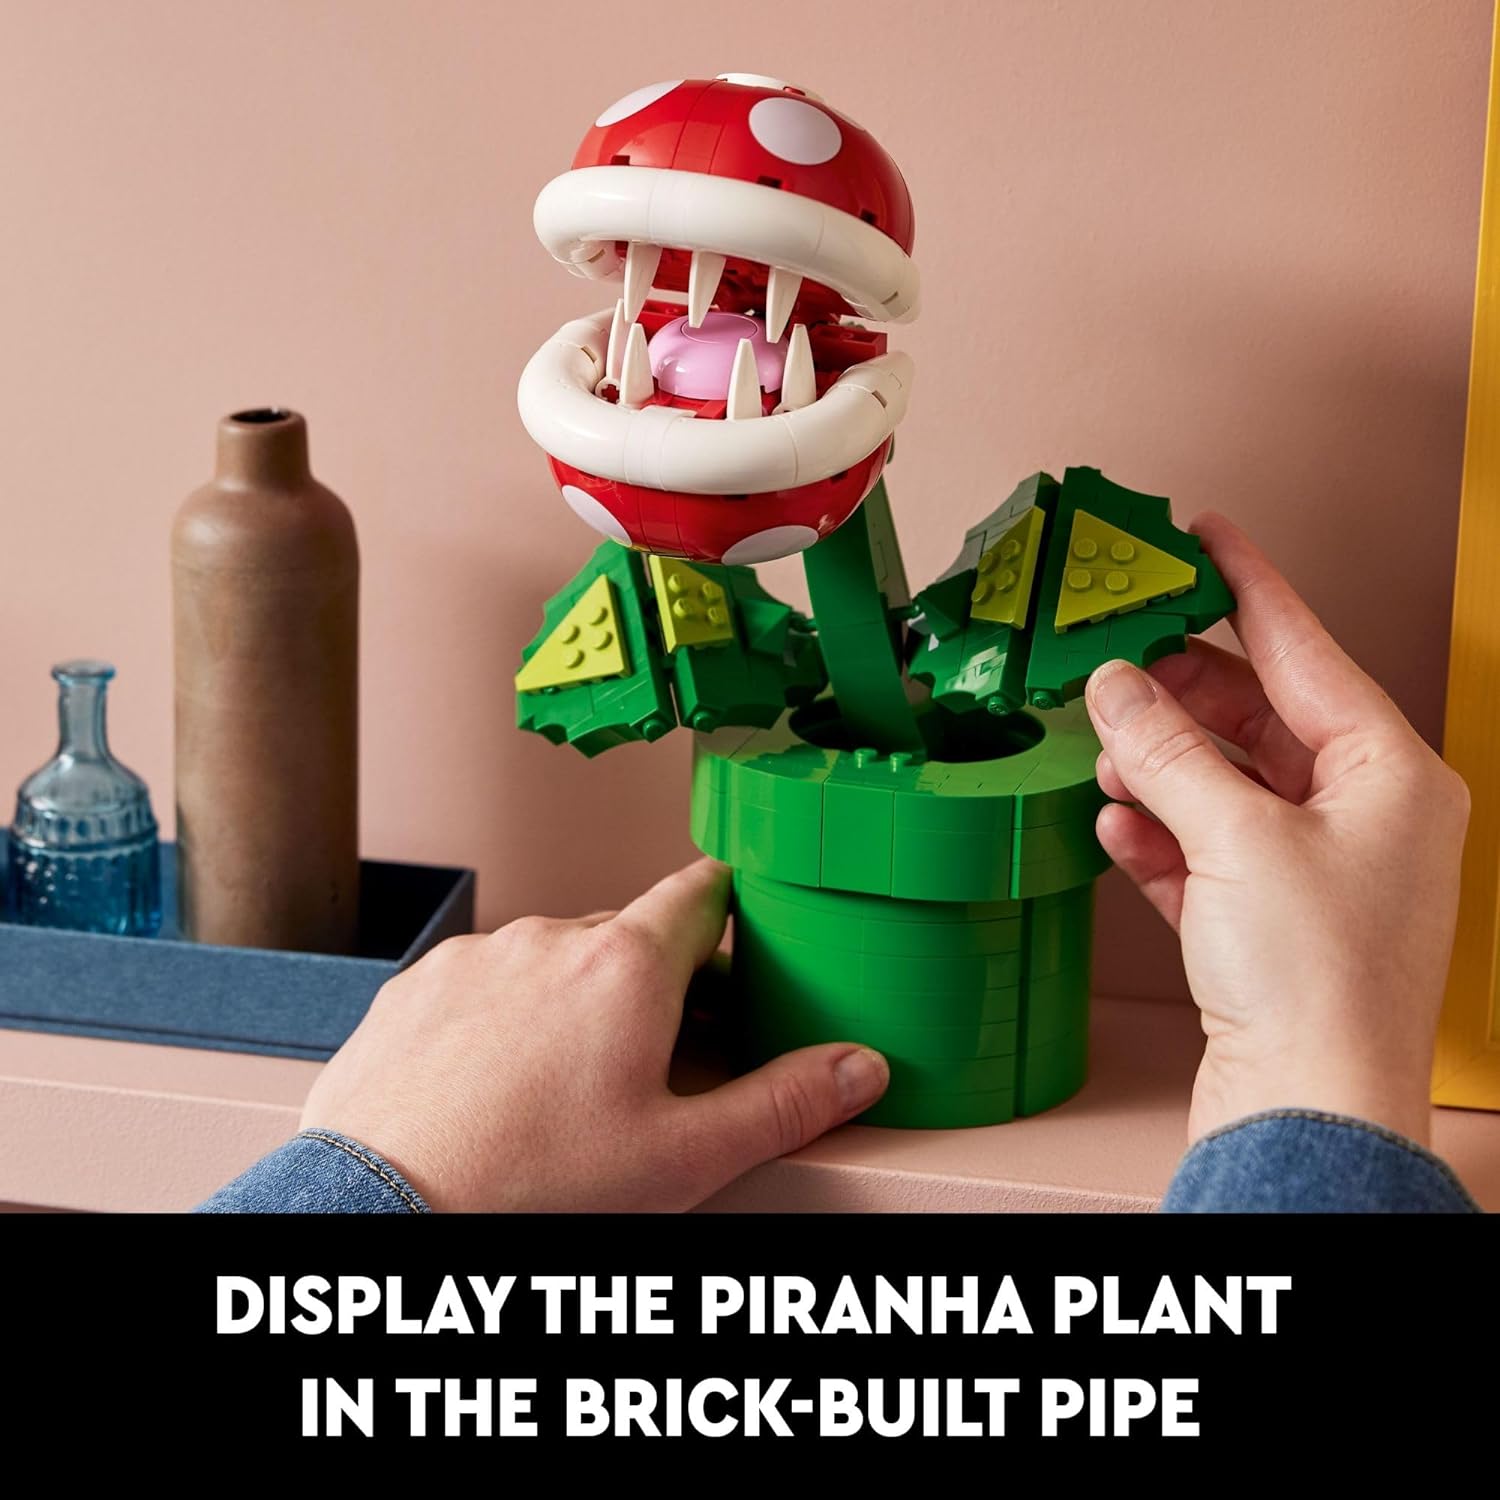 LEGO 71426 Super Mario Piranha Plant , Build and Display Super Mario Brothers Toy for Adults and Teens, Authentically Detailed Posable Figure